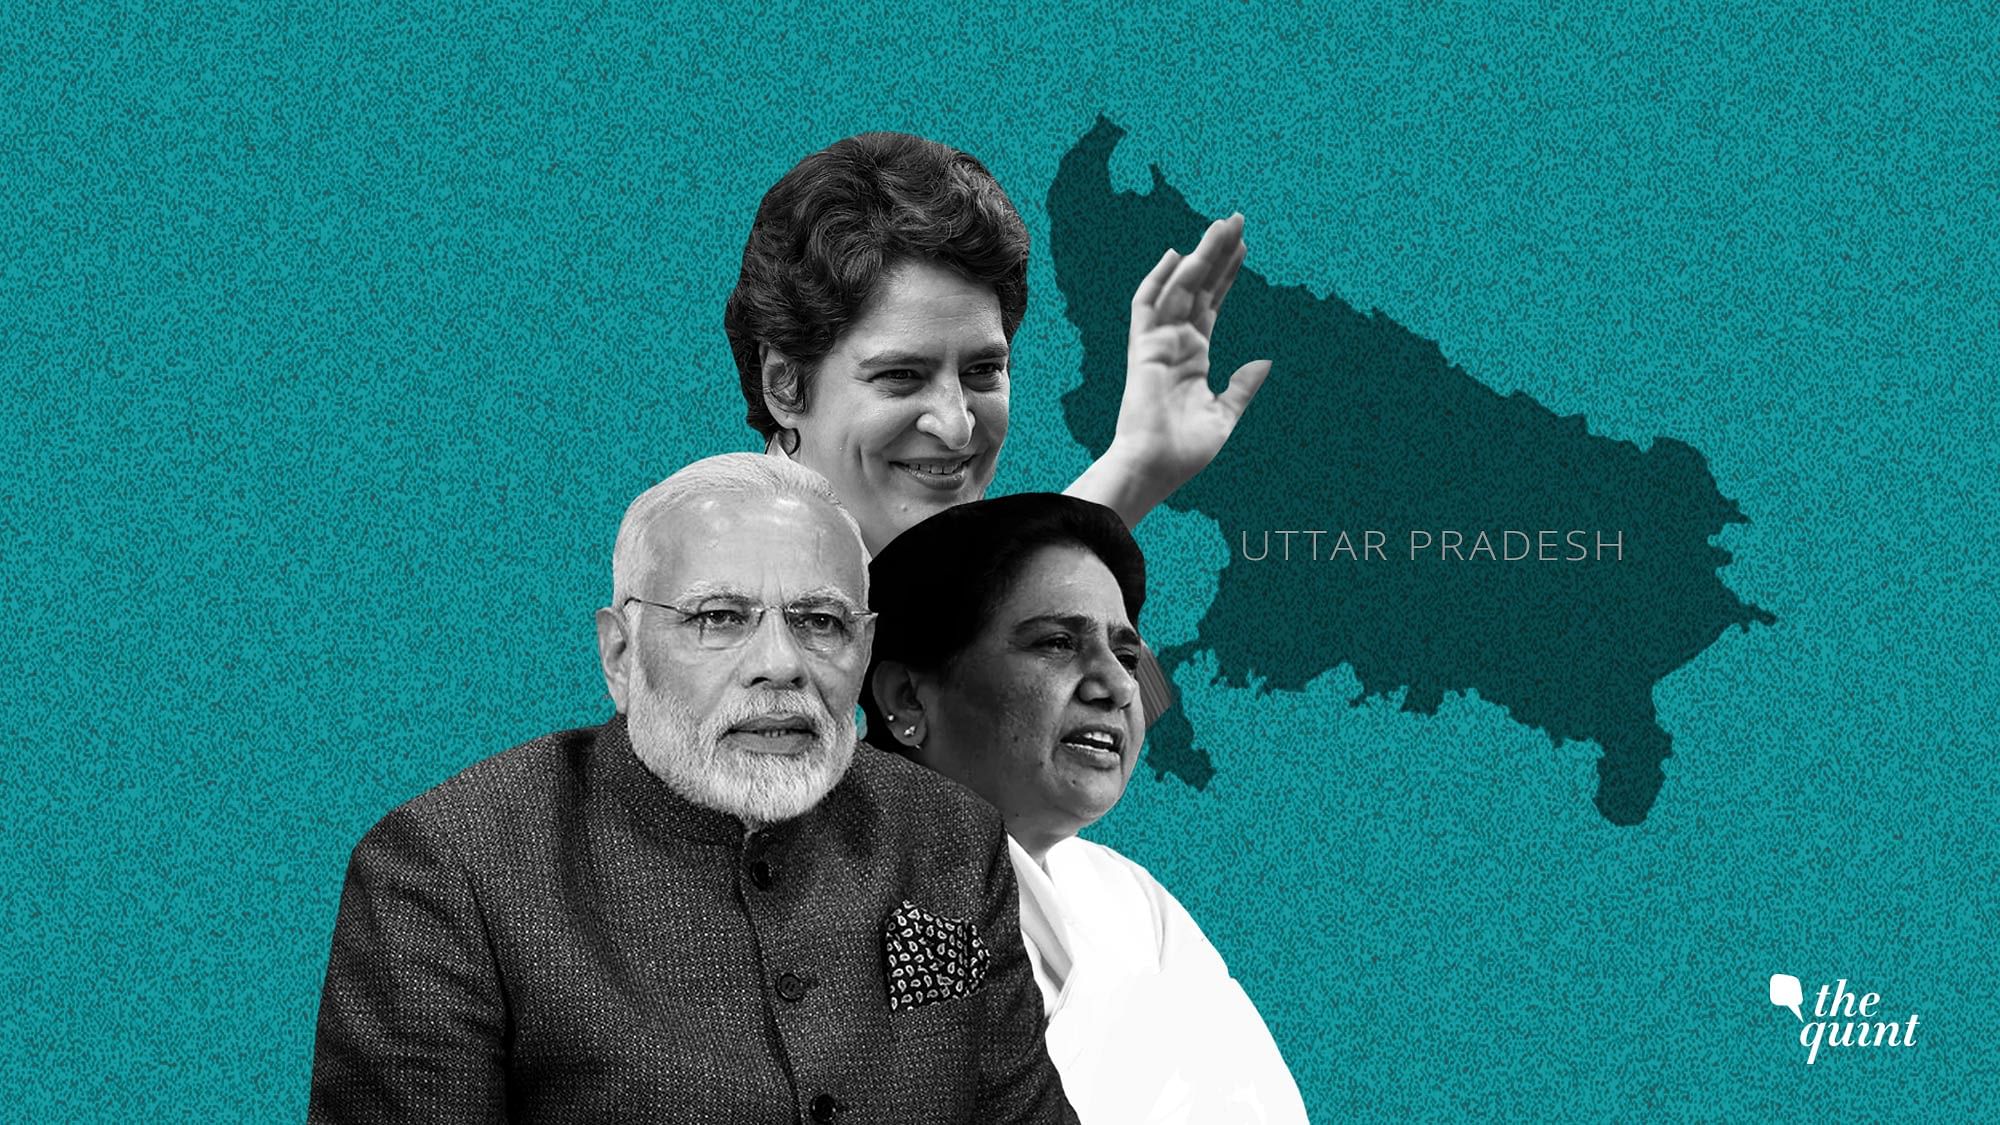 Considering the anti-incumbency seen in recent years, UP is going to see a new winner in the 2019 Lok Sabha polls.